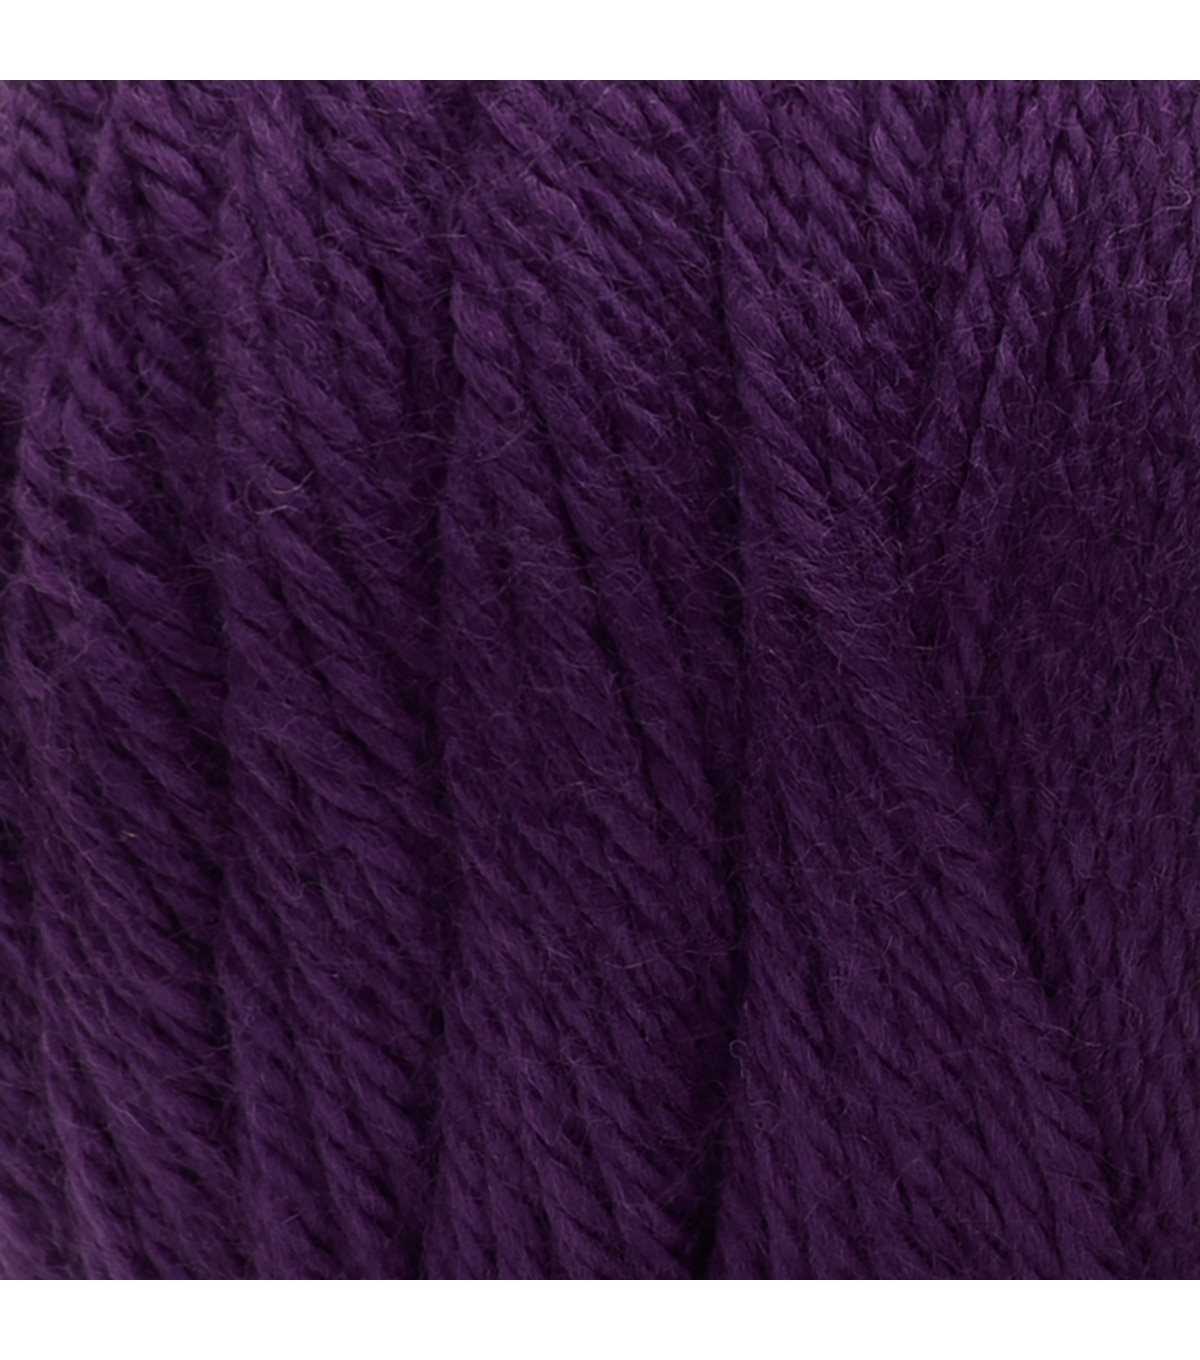 Simply Soft Yarn Color Chart